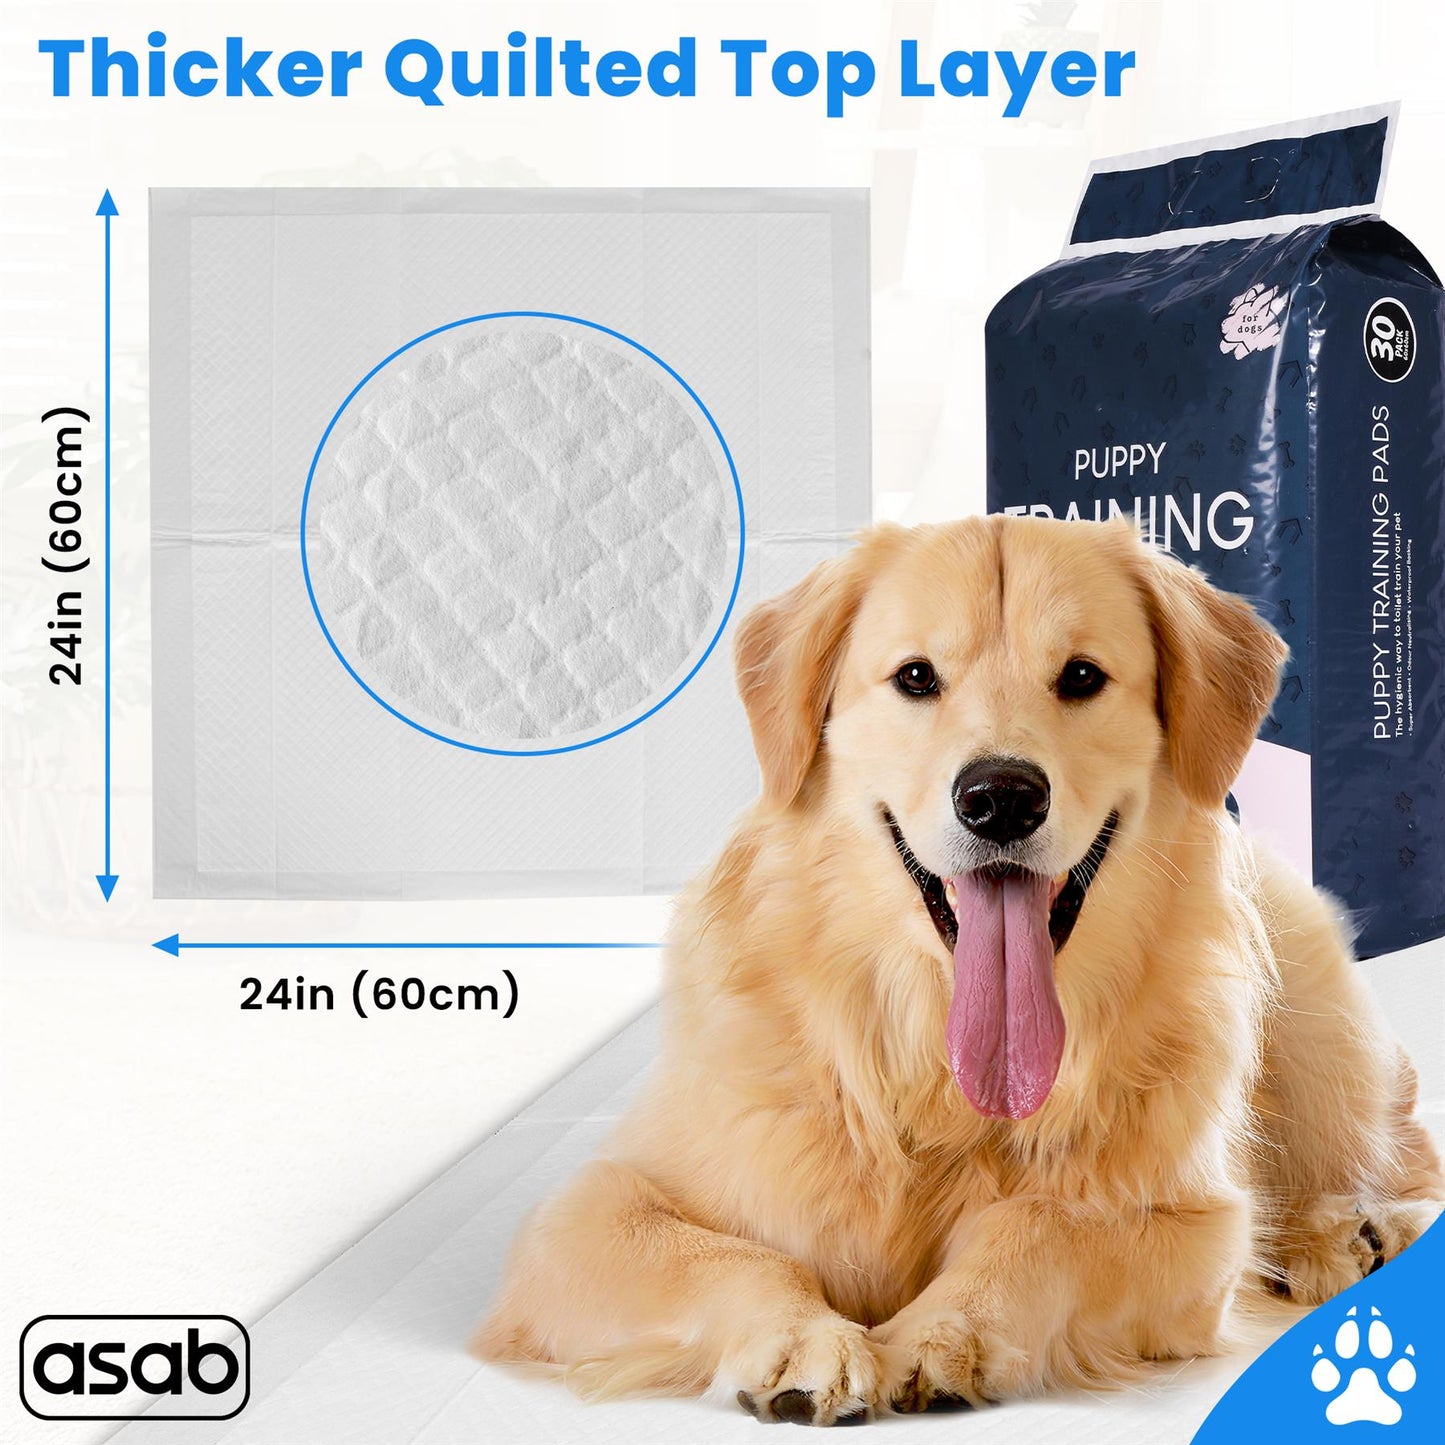 Train Your Pet Dog With Highly Absorbent And Leak-Proof Training Pads